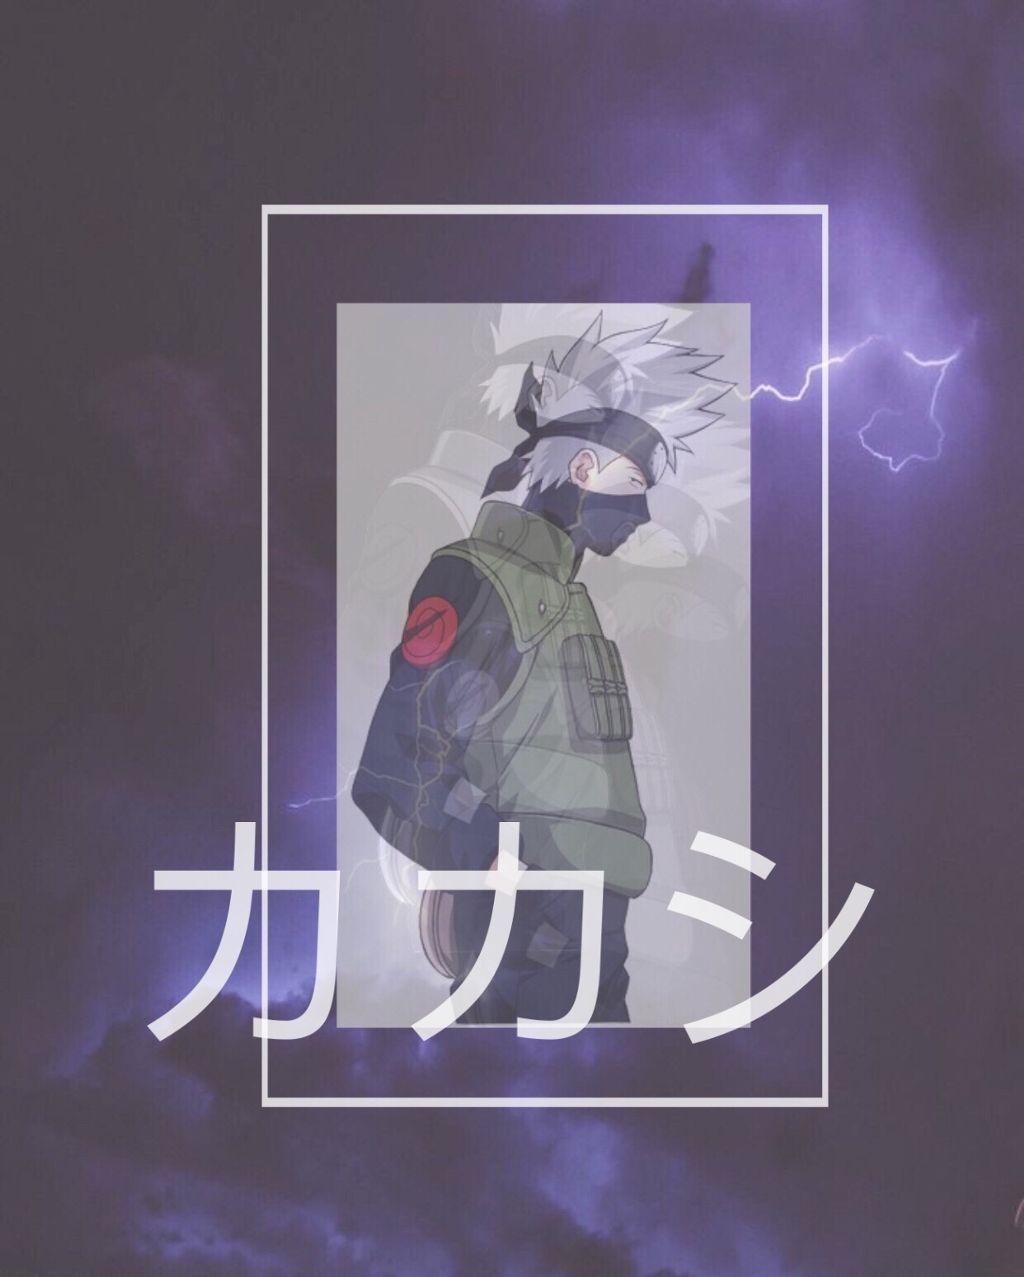 A man with an image of him in the clouds - Naruto